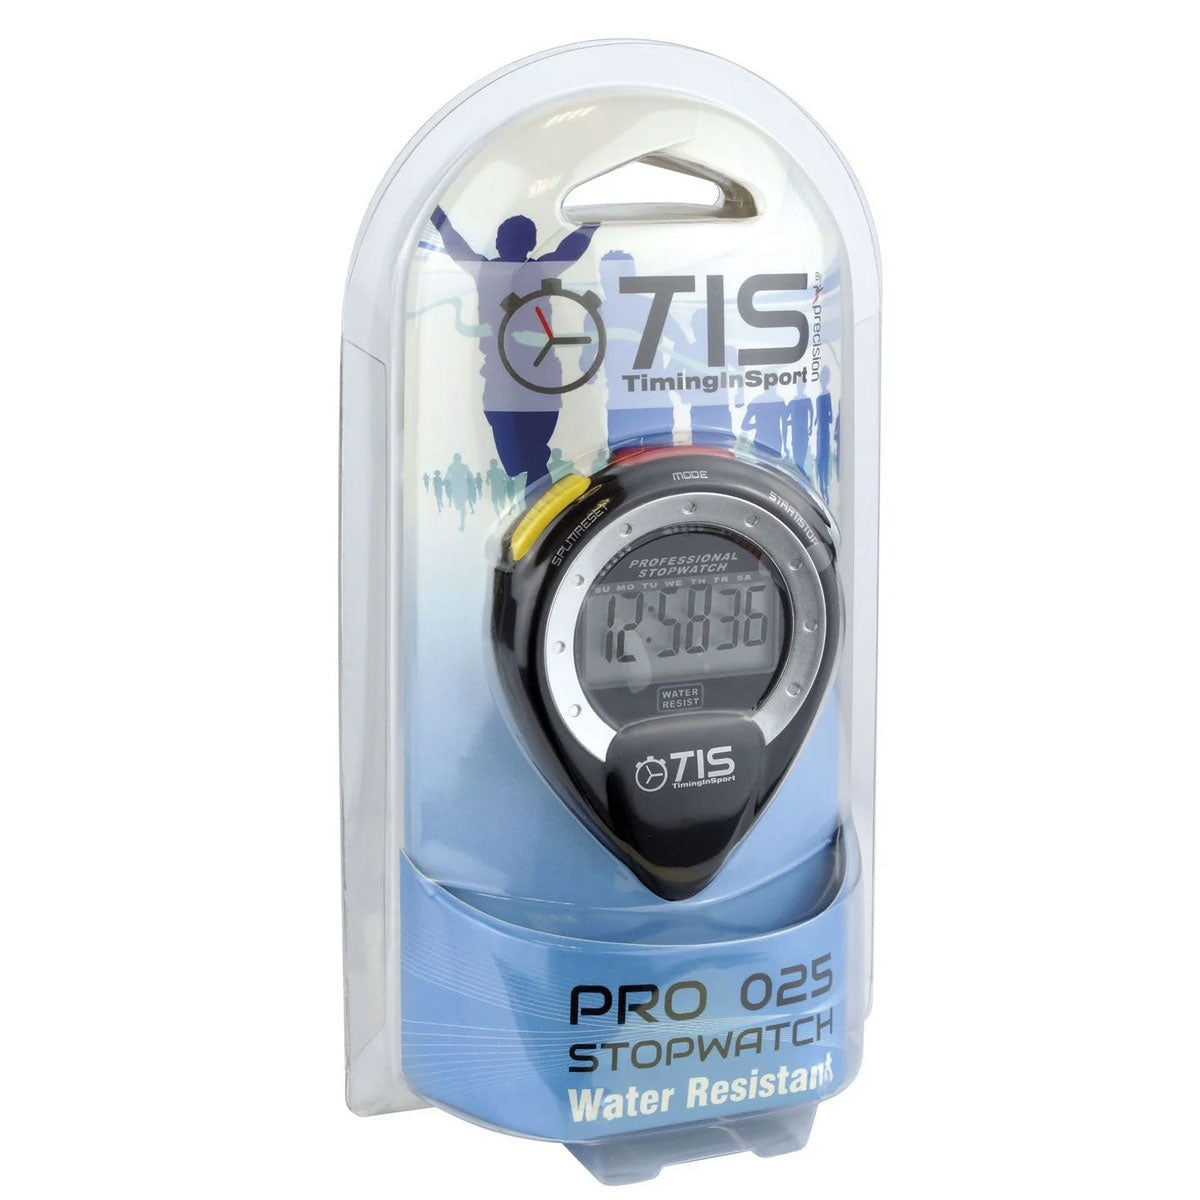 Timing in Sport Pro 025 Water-Resistant Stopwatch